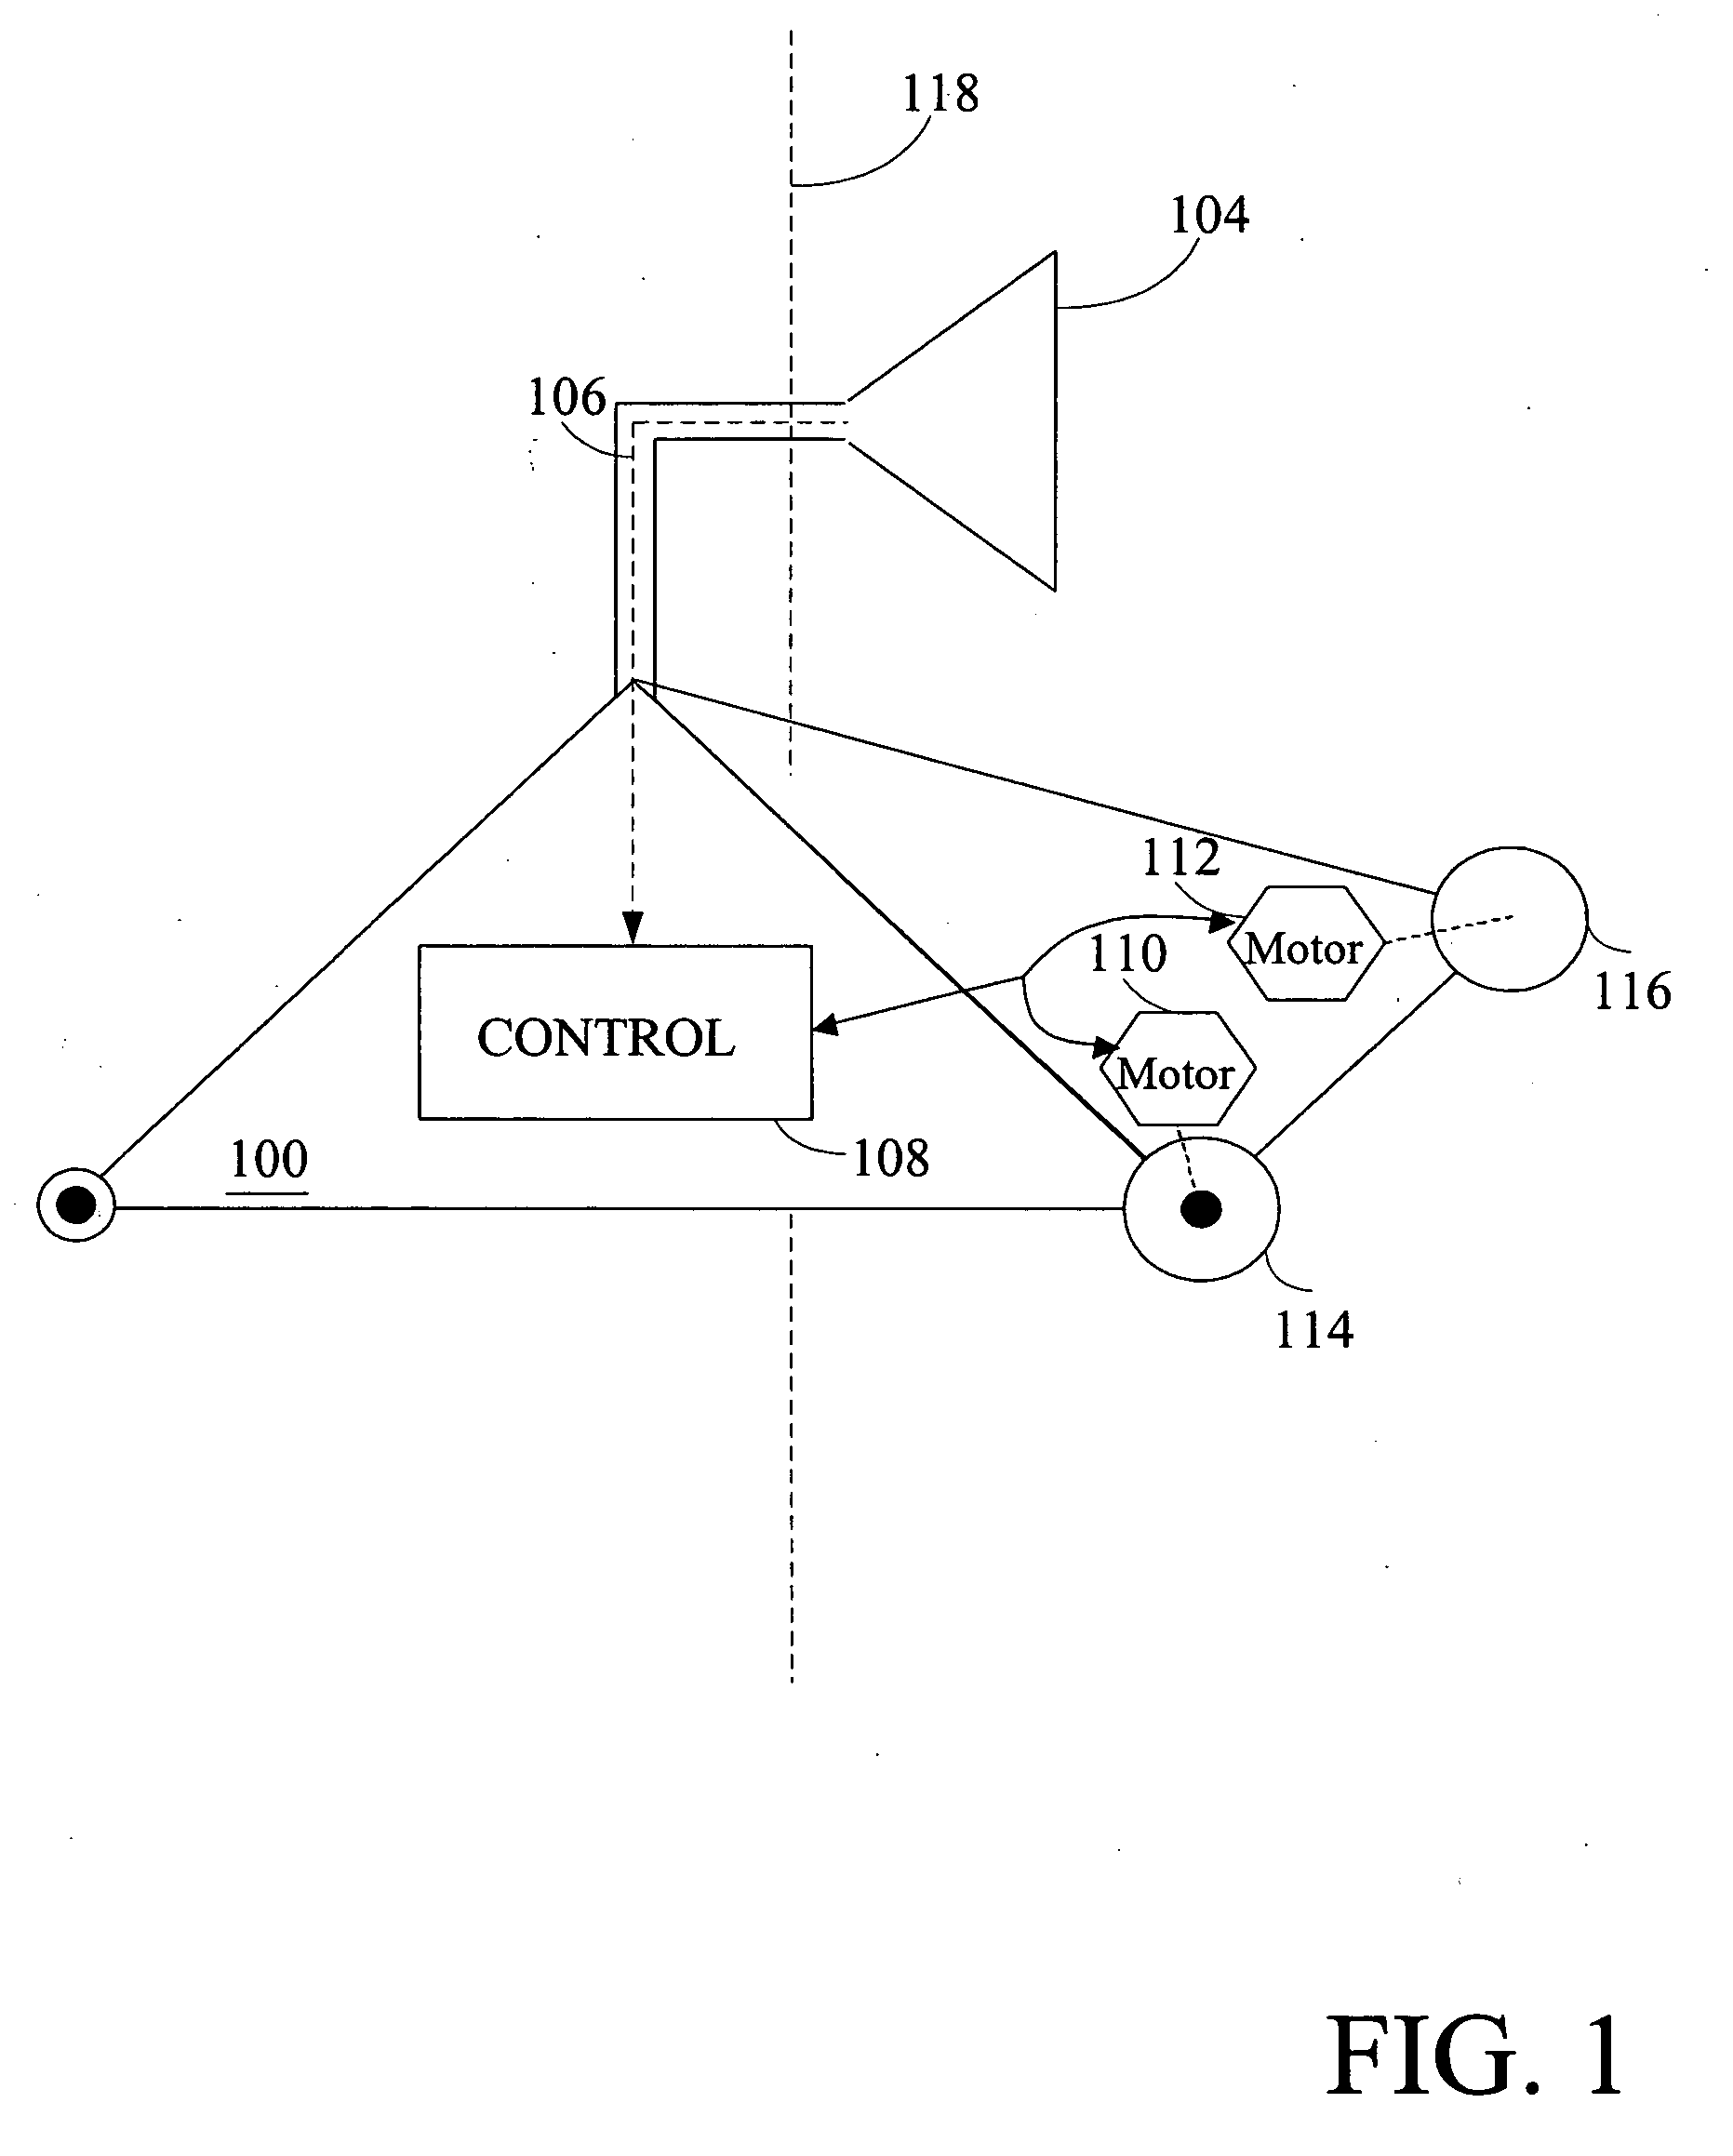 Systems and methods for incrementally updating a pose of a mobile device calculated by visual simultaneous localization and mapping techniques